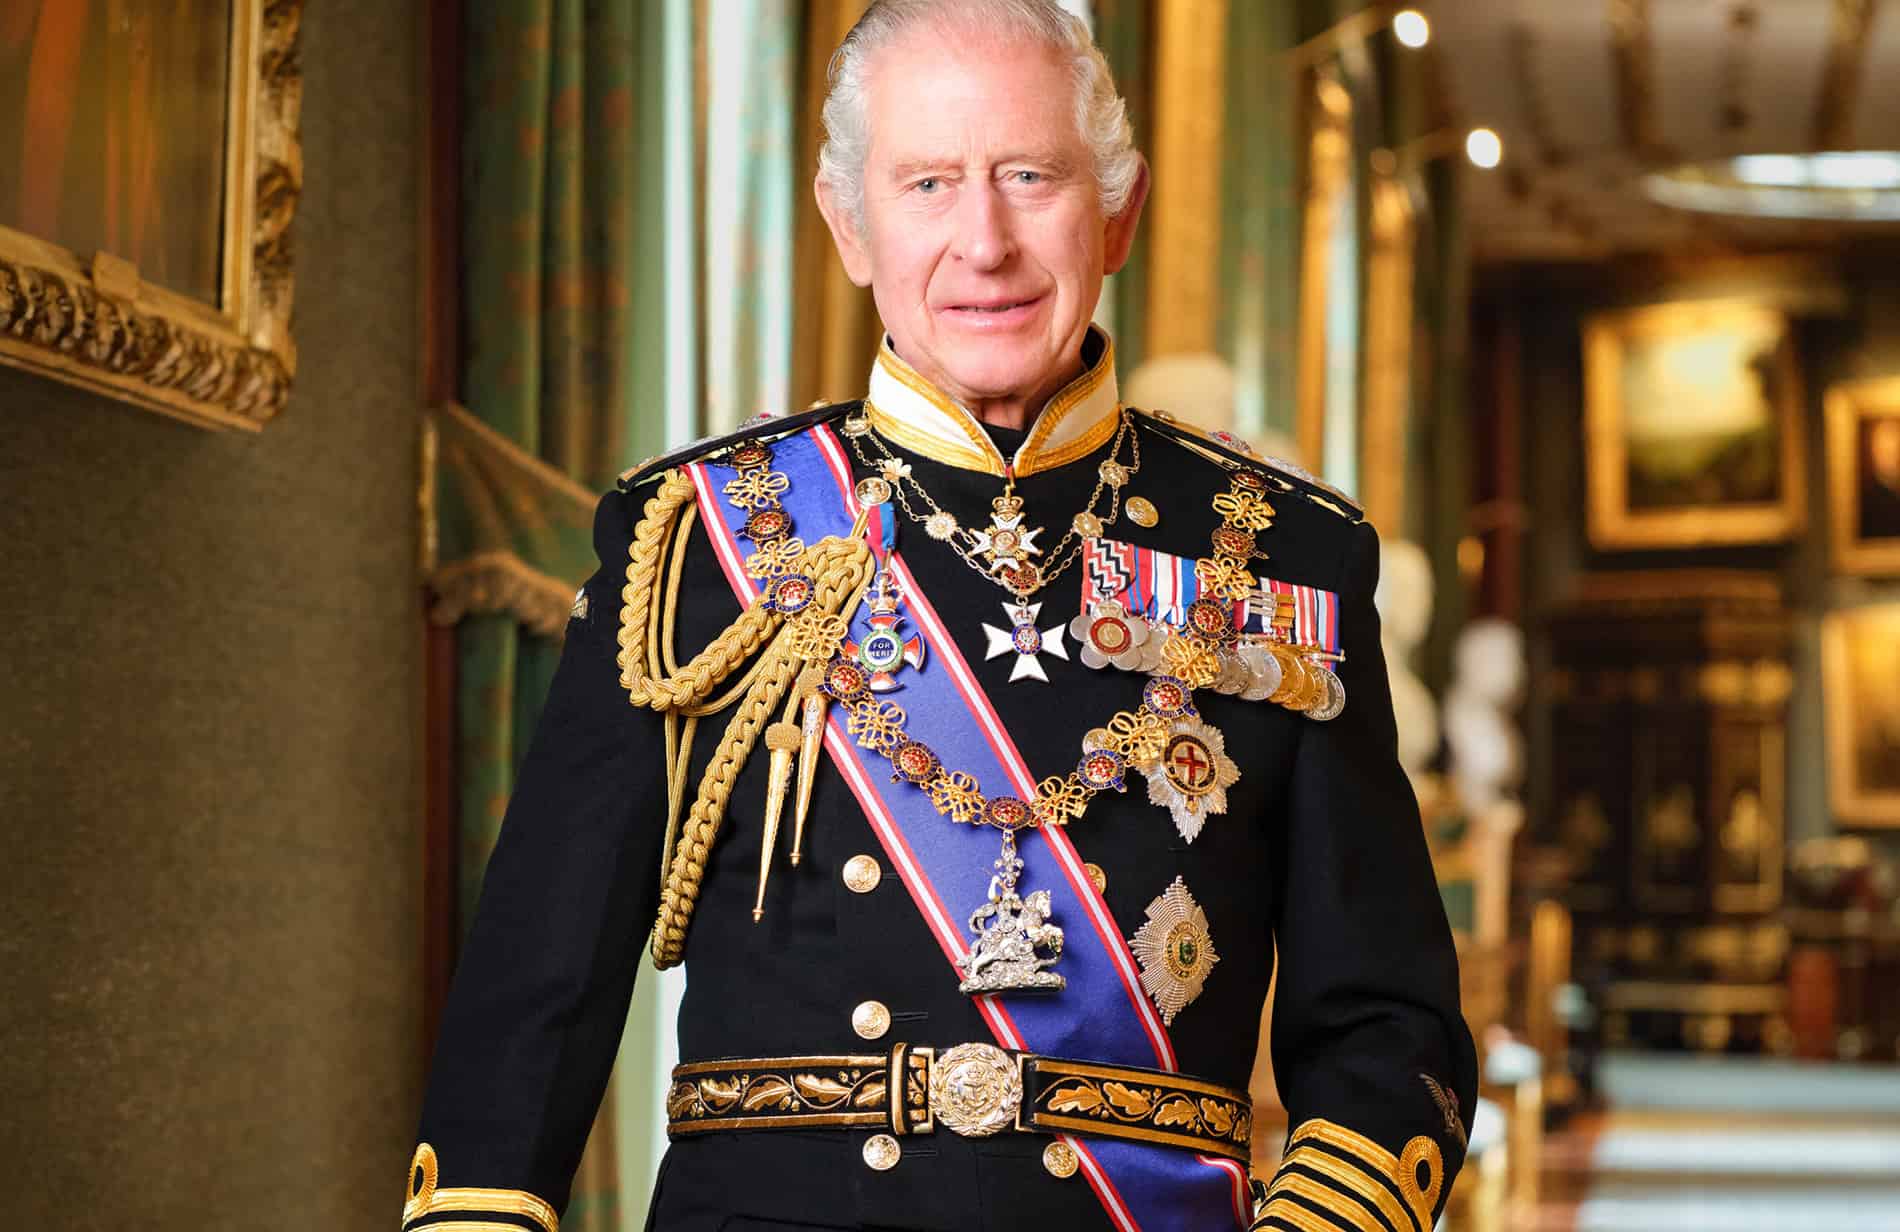 King’s portrait to hang in public buildings as part of a £8 million taxpayer-funded scheme